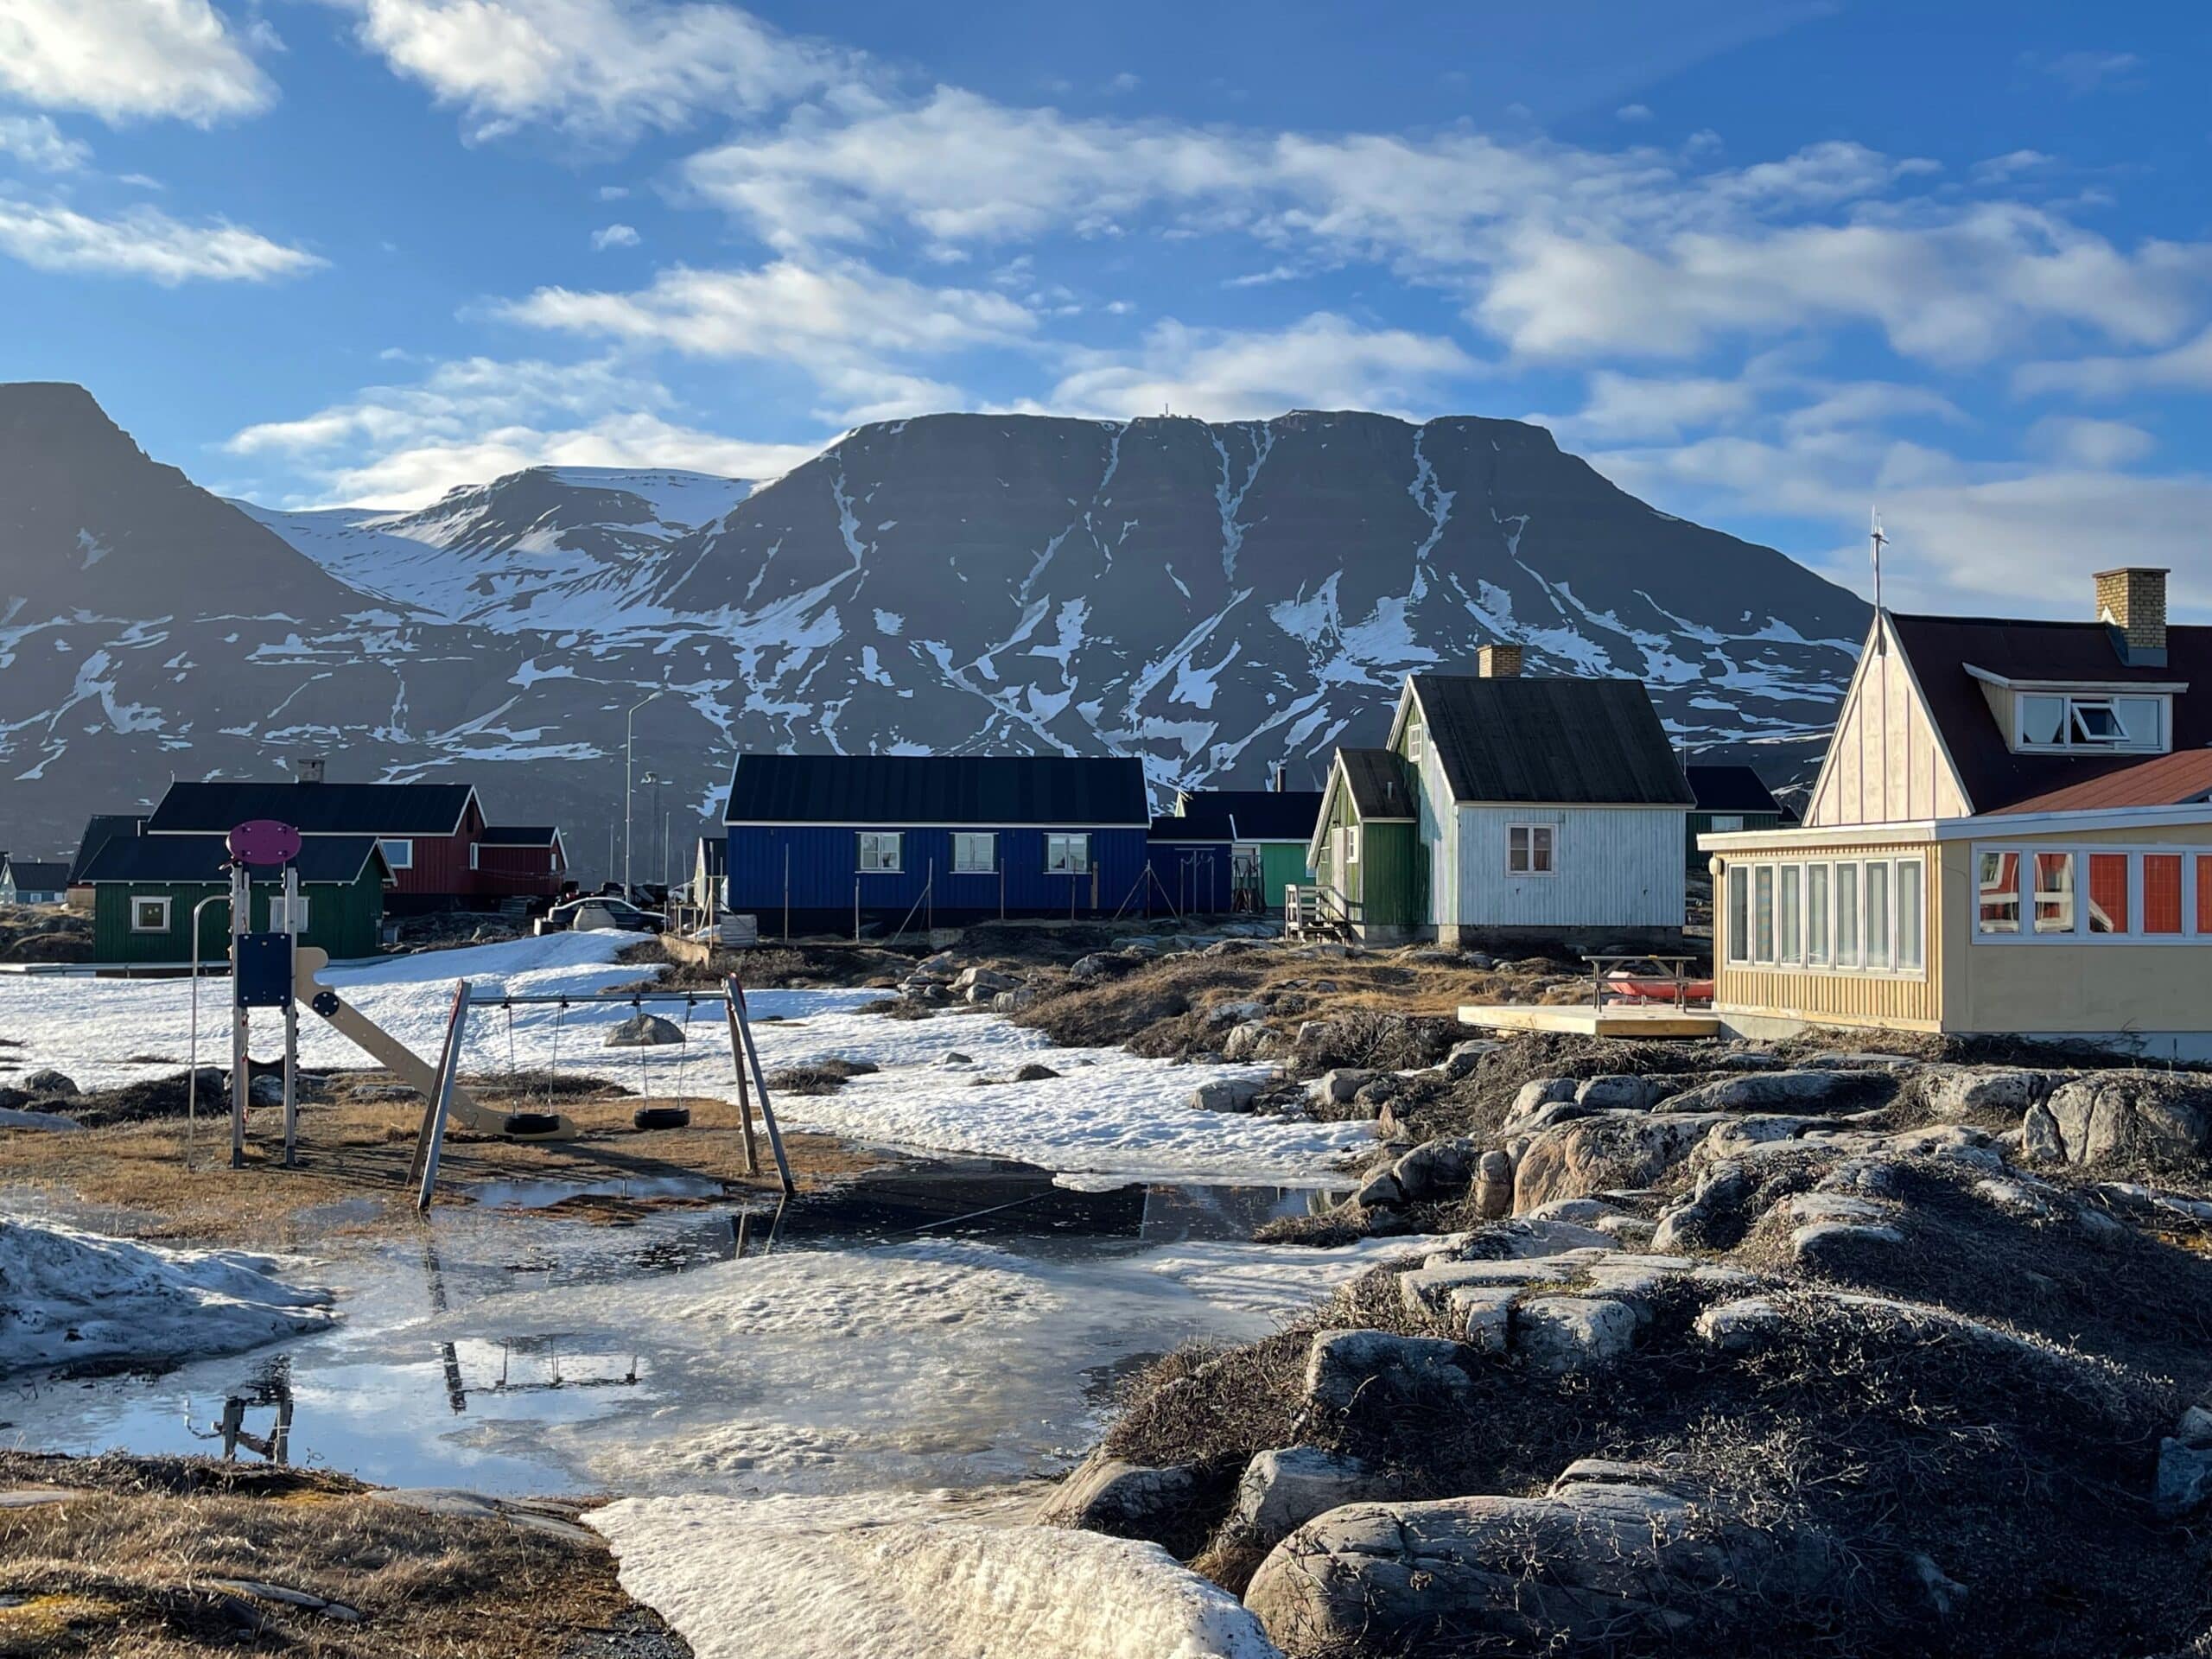 A small cirlce of colorful houses encircle a small playstructure on rocky ground and melting snow and ice. Snowy mountains rise behind them.